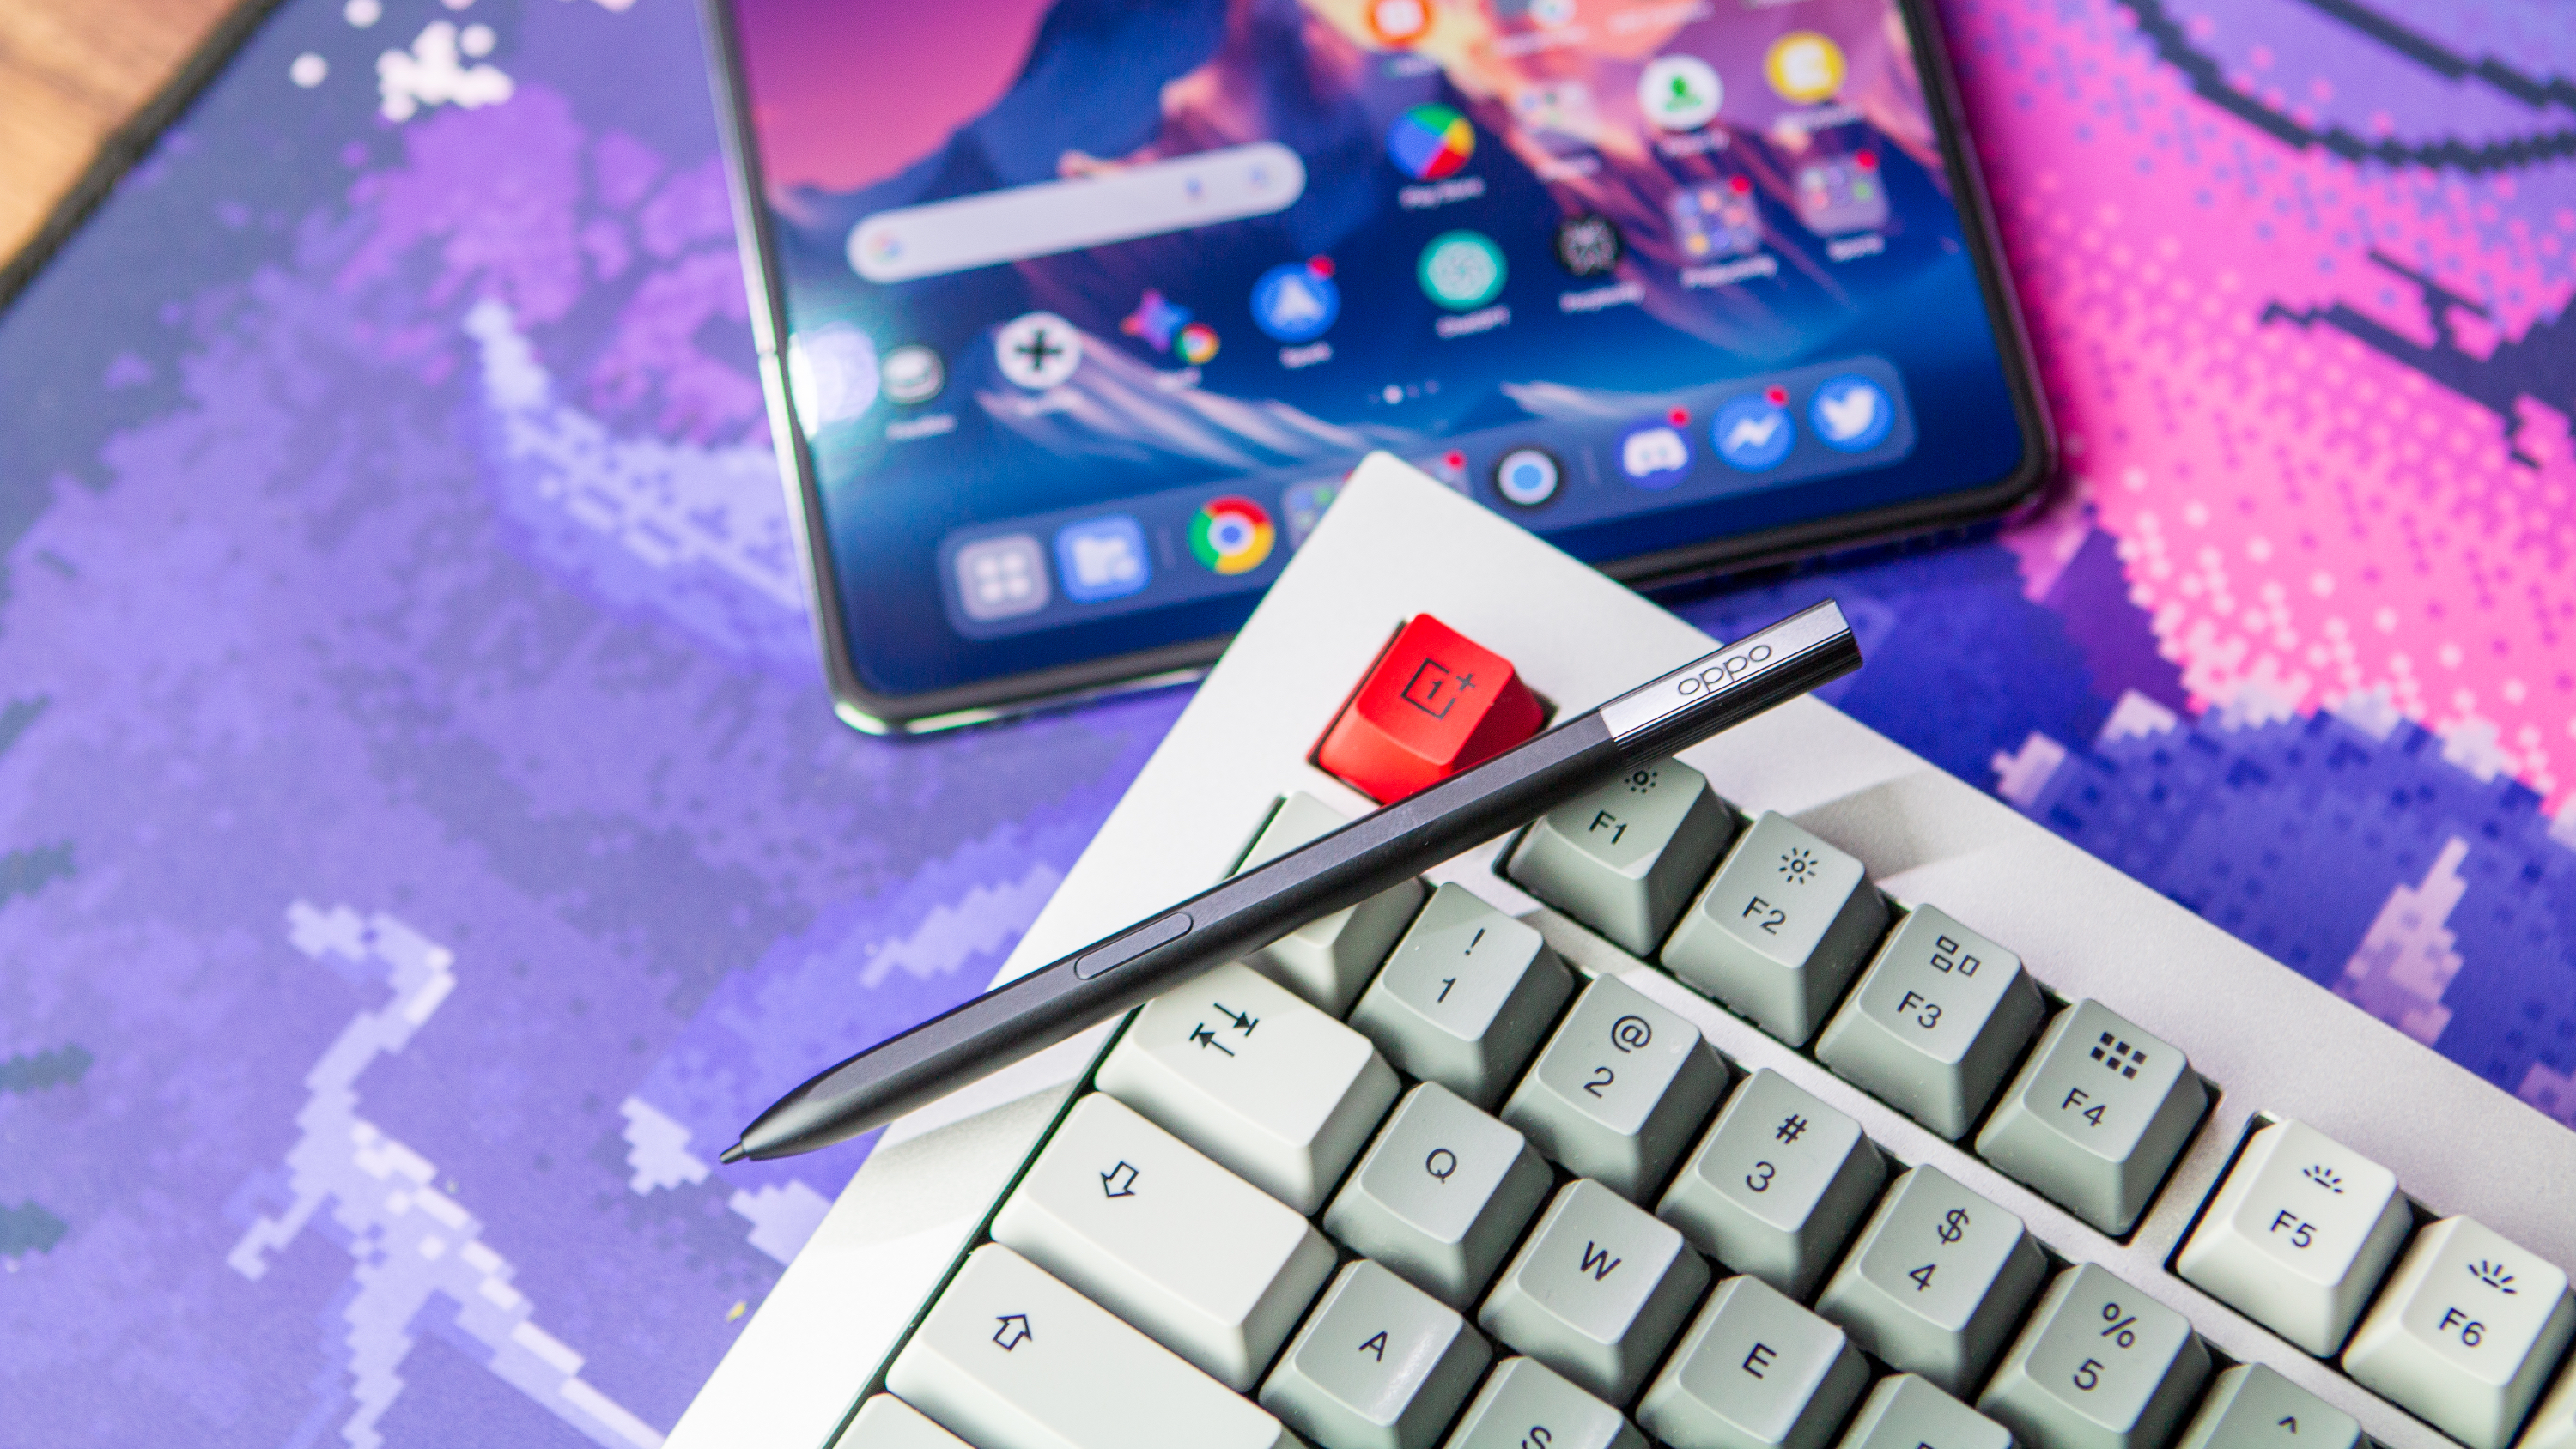 OnePlus Open review: A no-compromise foldable phone